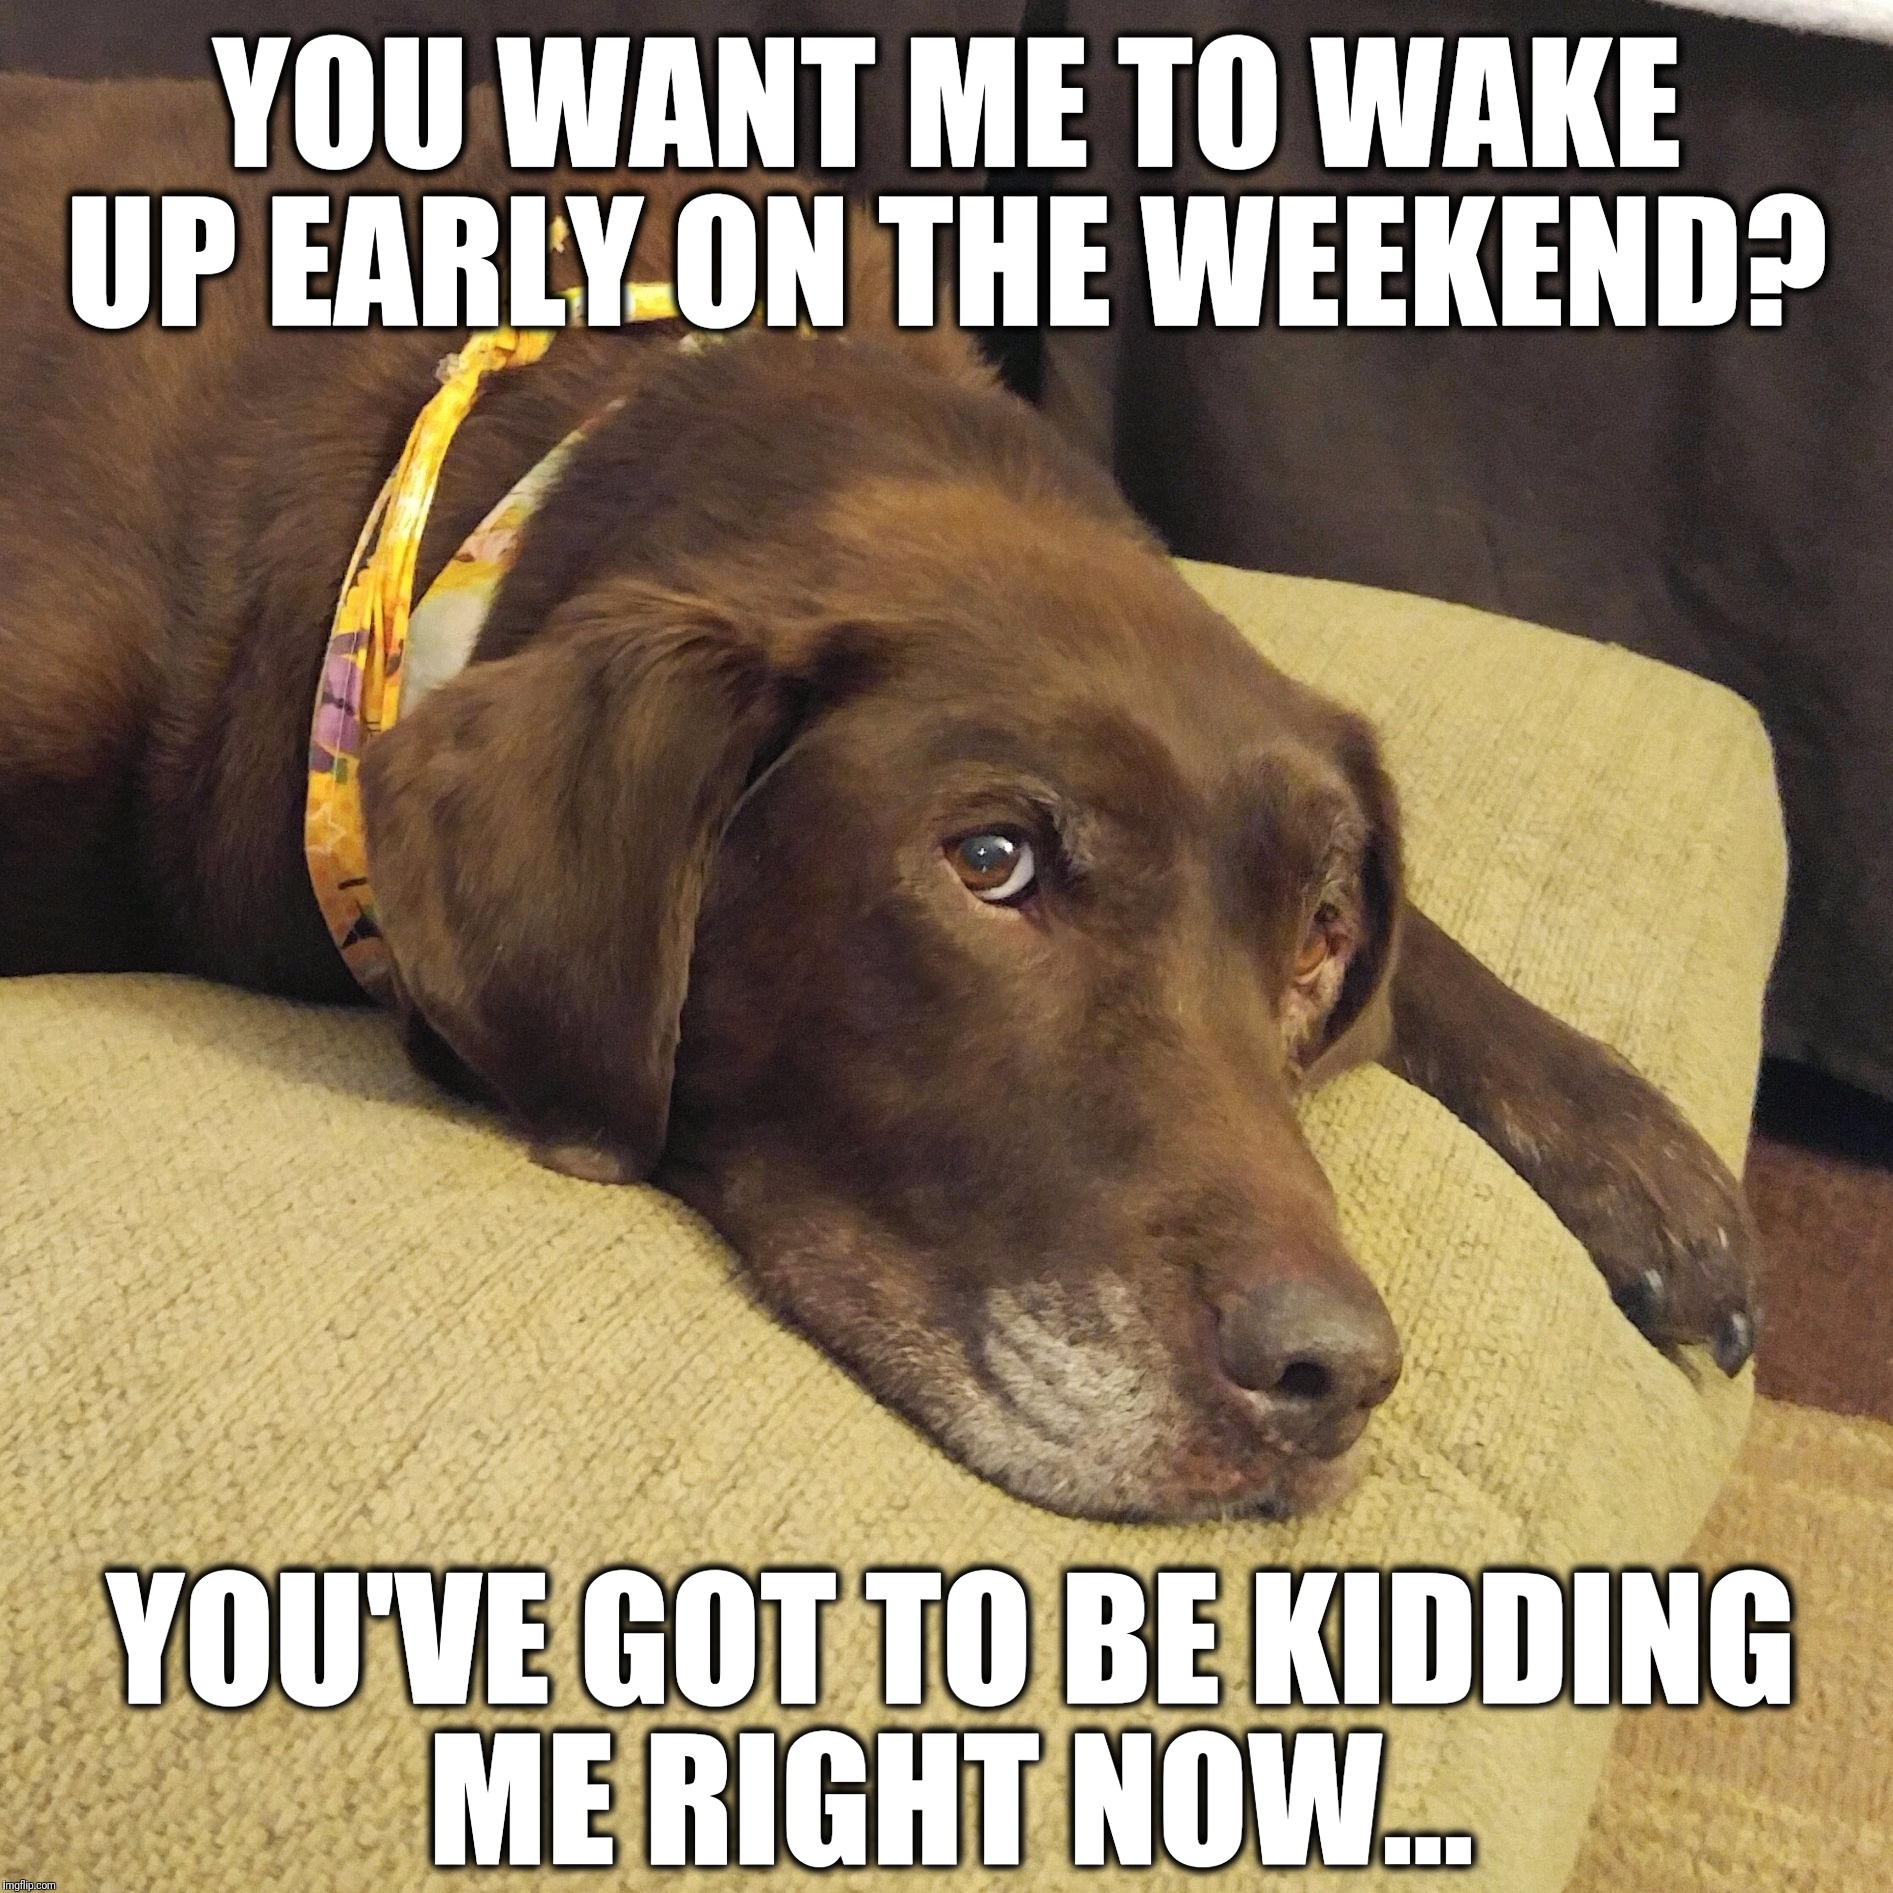 I'm sleeping in this weekend!  | YOU WANT ME TO WAKE UP EARLY ON THE WEEKEND? YOU'VE GOT TO BE KIDDING ME RIGHT NOW... | image tagged in nestle the chocolate lab,weekend,tgif,funny,memes,dogs | made w/ Imgflip meme maker